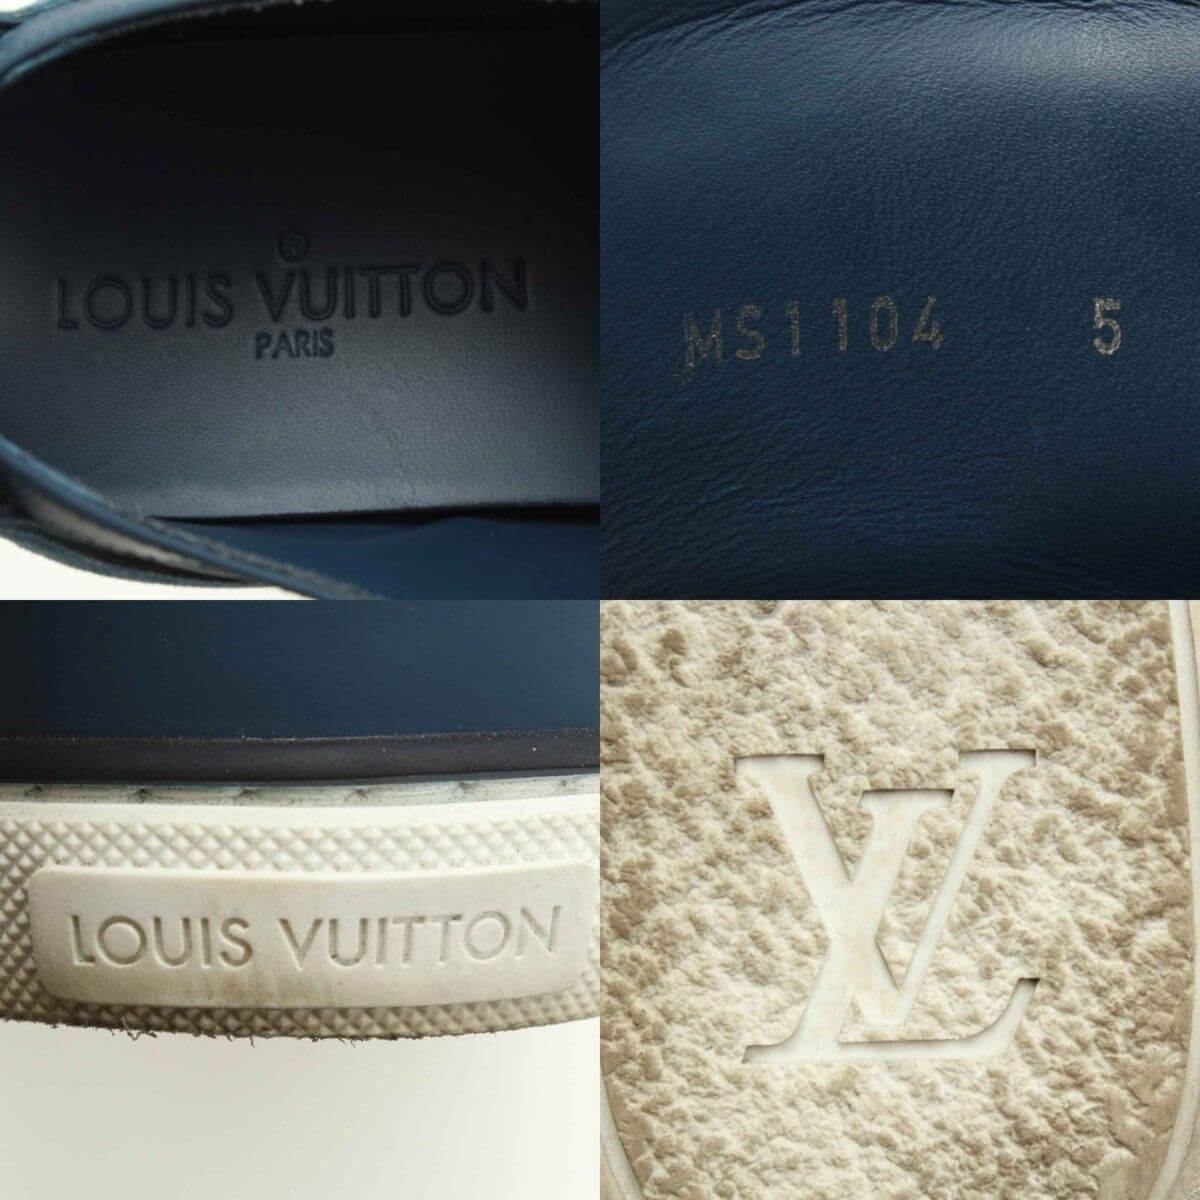 LOUIS VUITTON Sneakers Shoes Size 6.5 Authentic Men Used from Japan